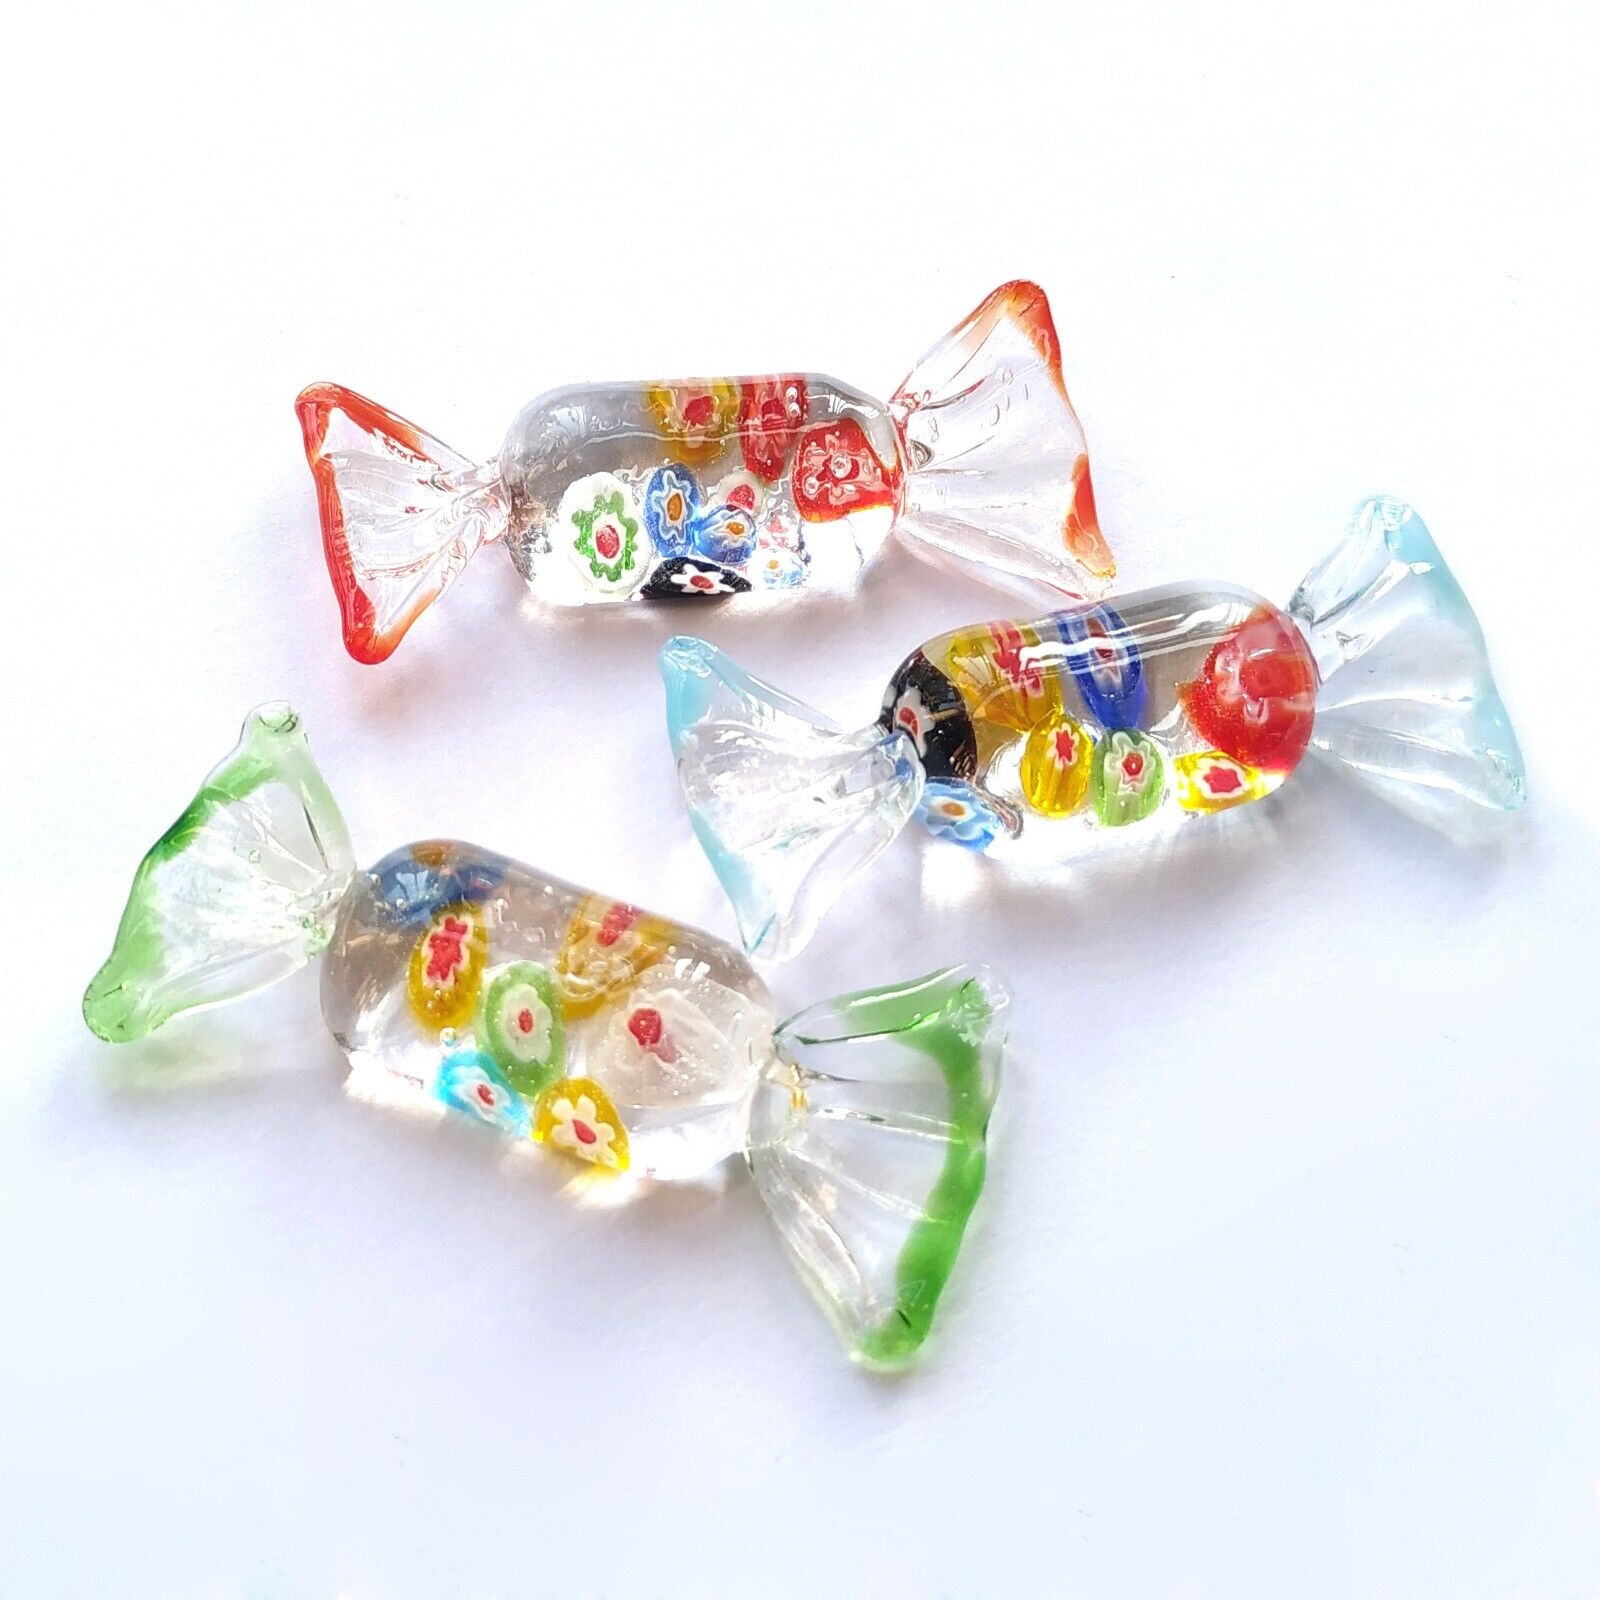 3 Pcs Art Glass Candy Colourful Red Green Lifelike Murano Style Ornaments Gift